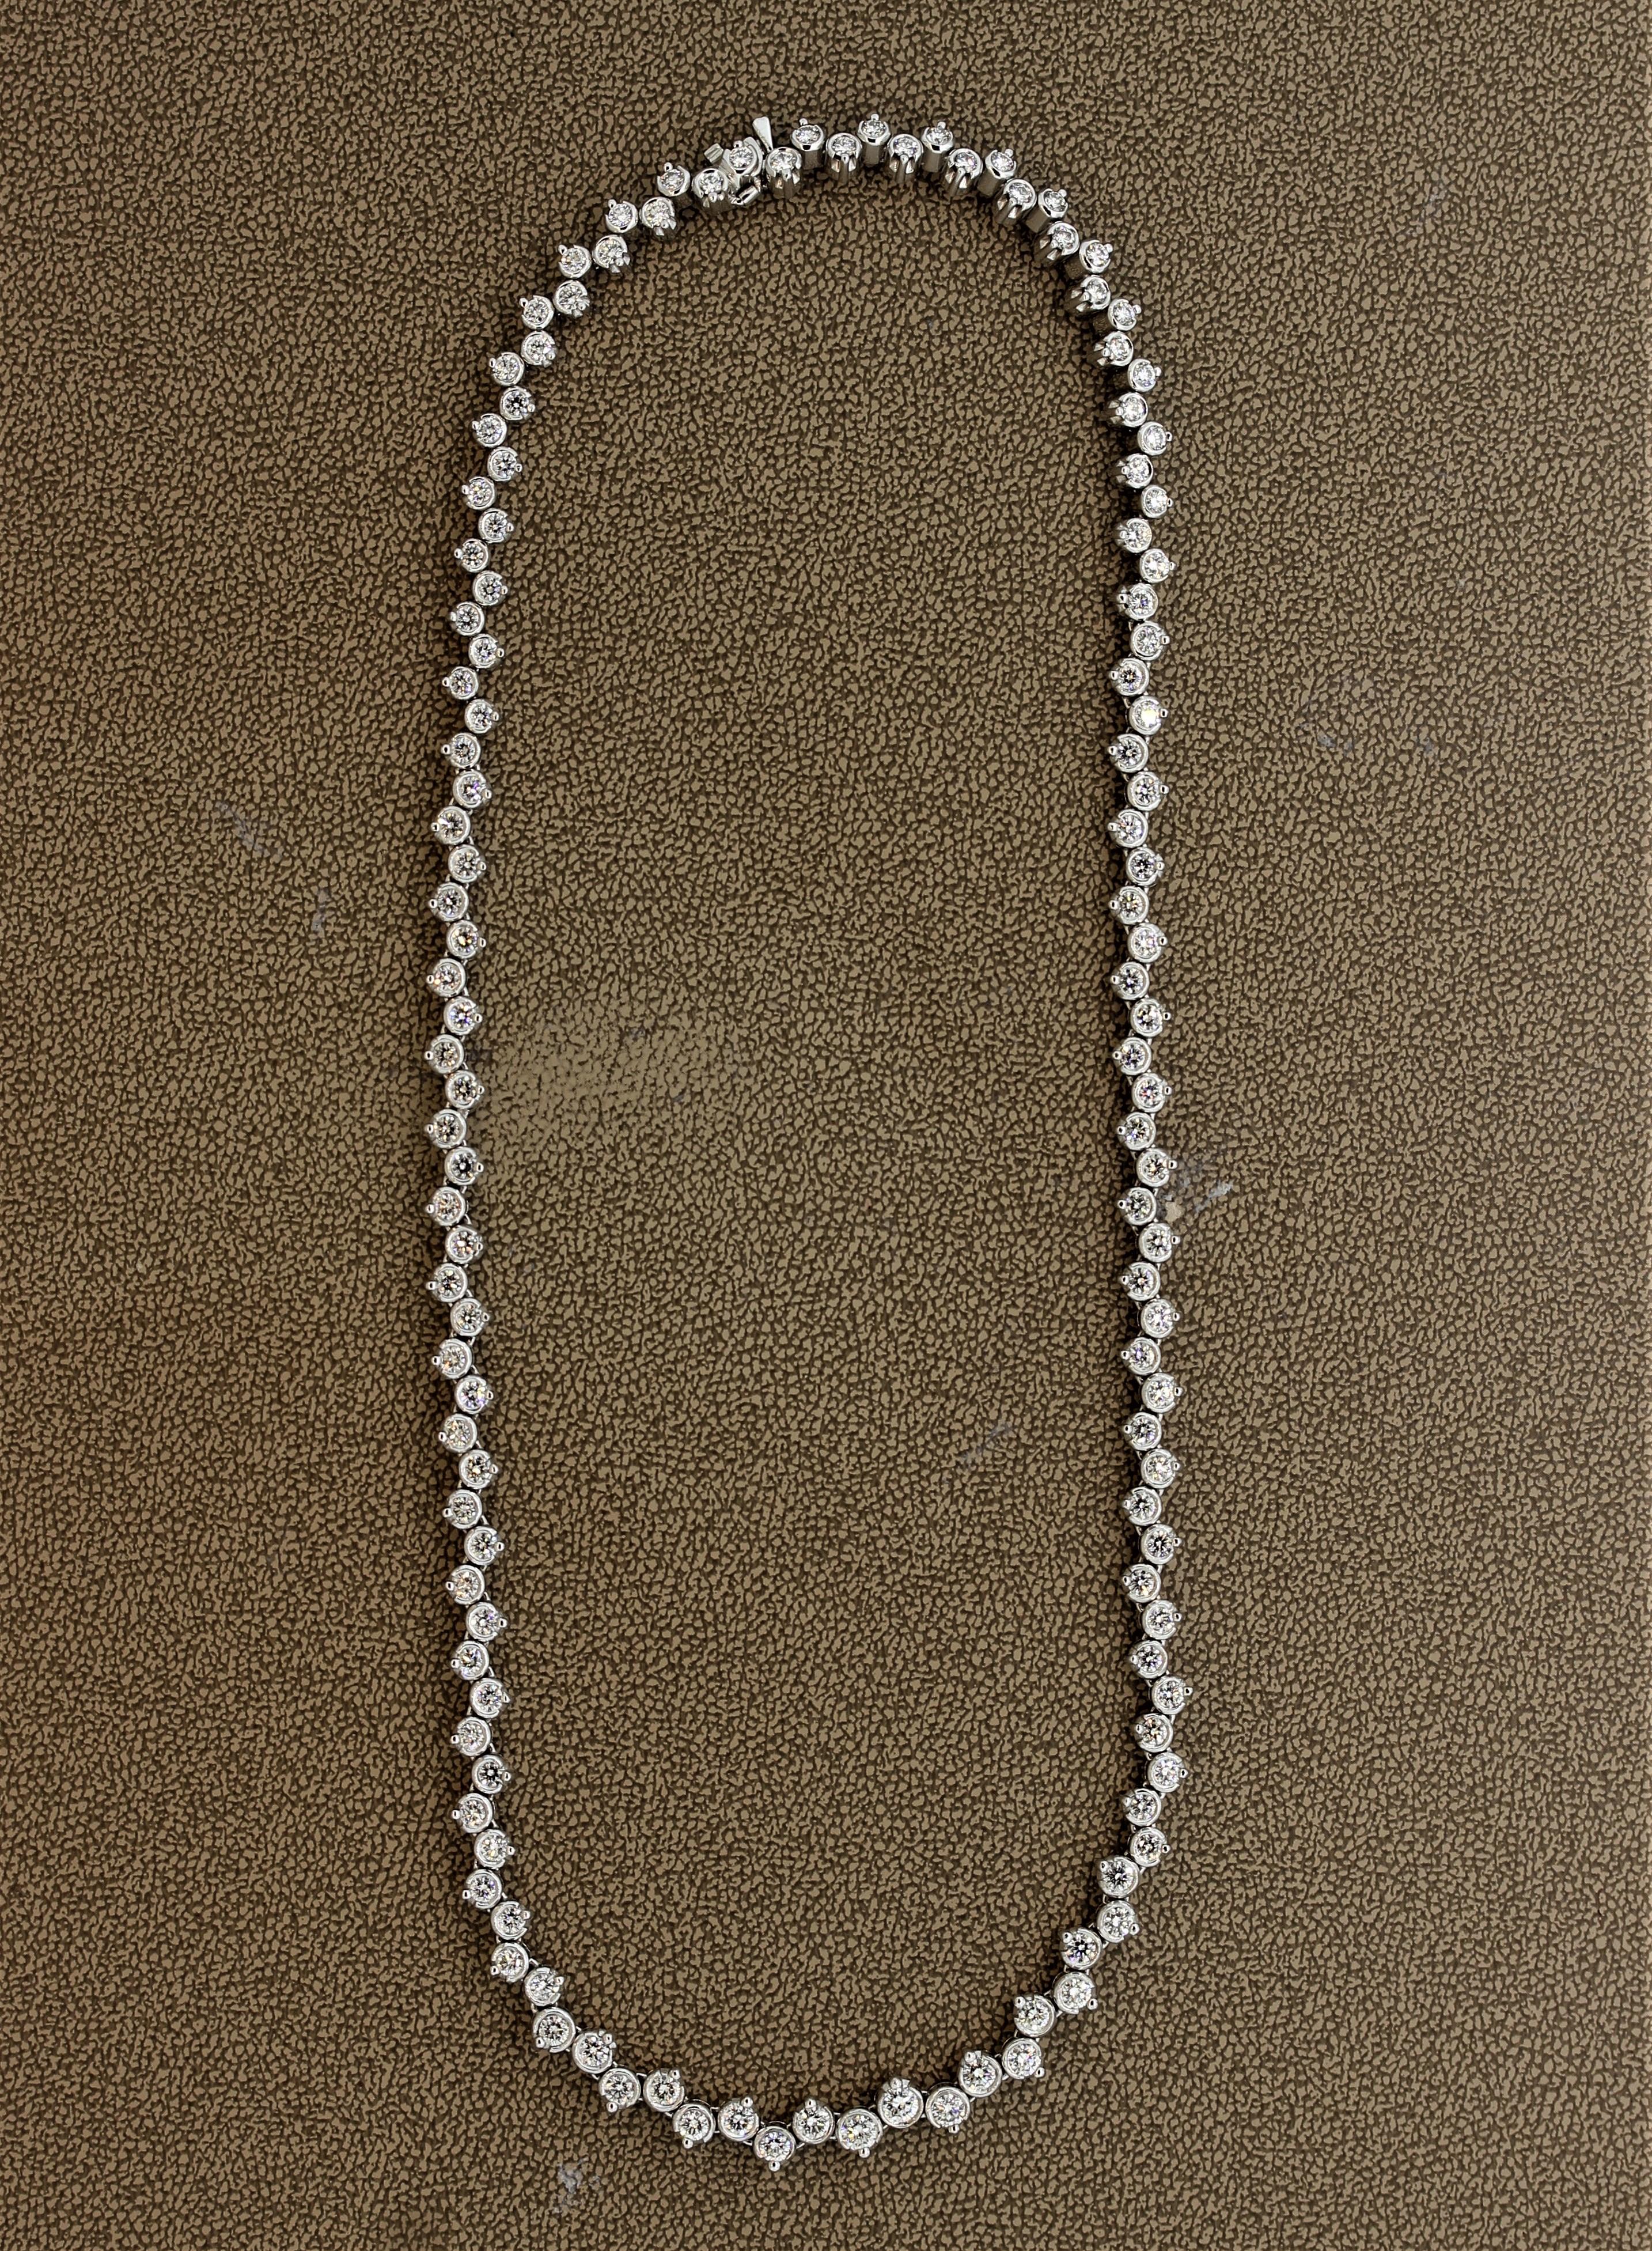 A modern take on the classic tennis necklace. This piece features 8.76 carat of fine round brilliant cut diamonds which are set in a unique bezel and prong setting combination. Most of the diamonds are bezel-set (gold wrapping around the edges of